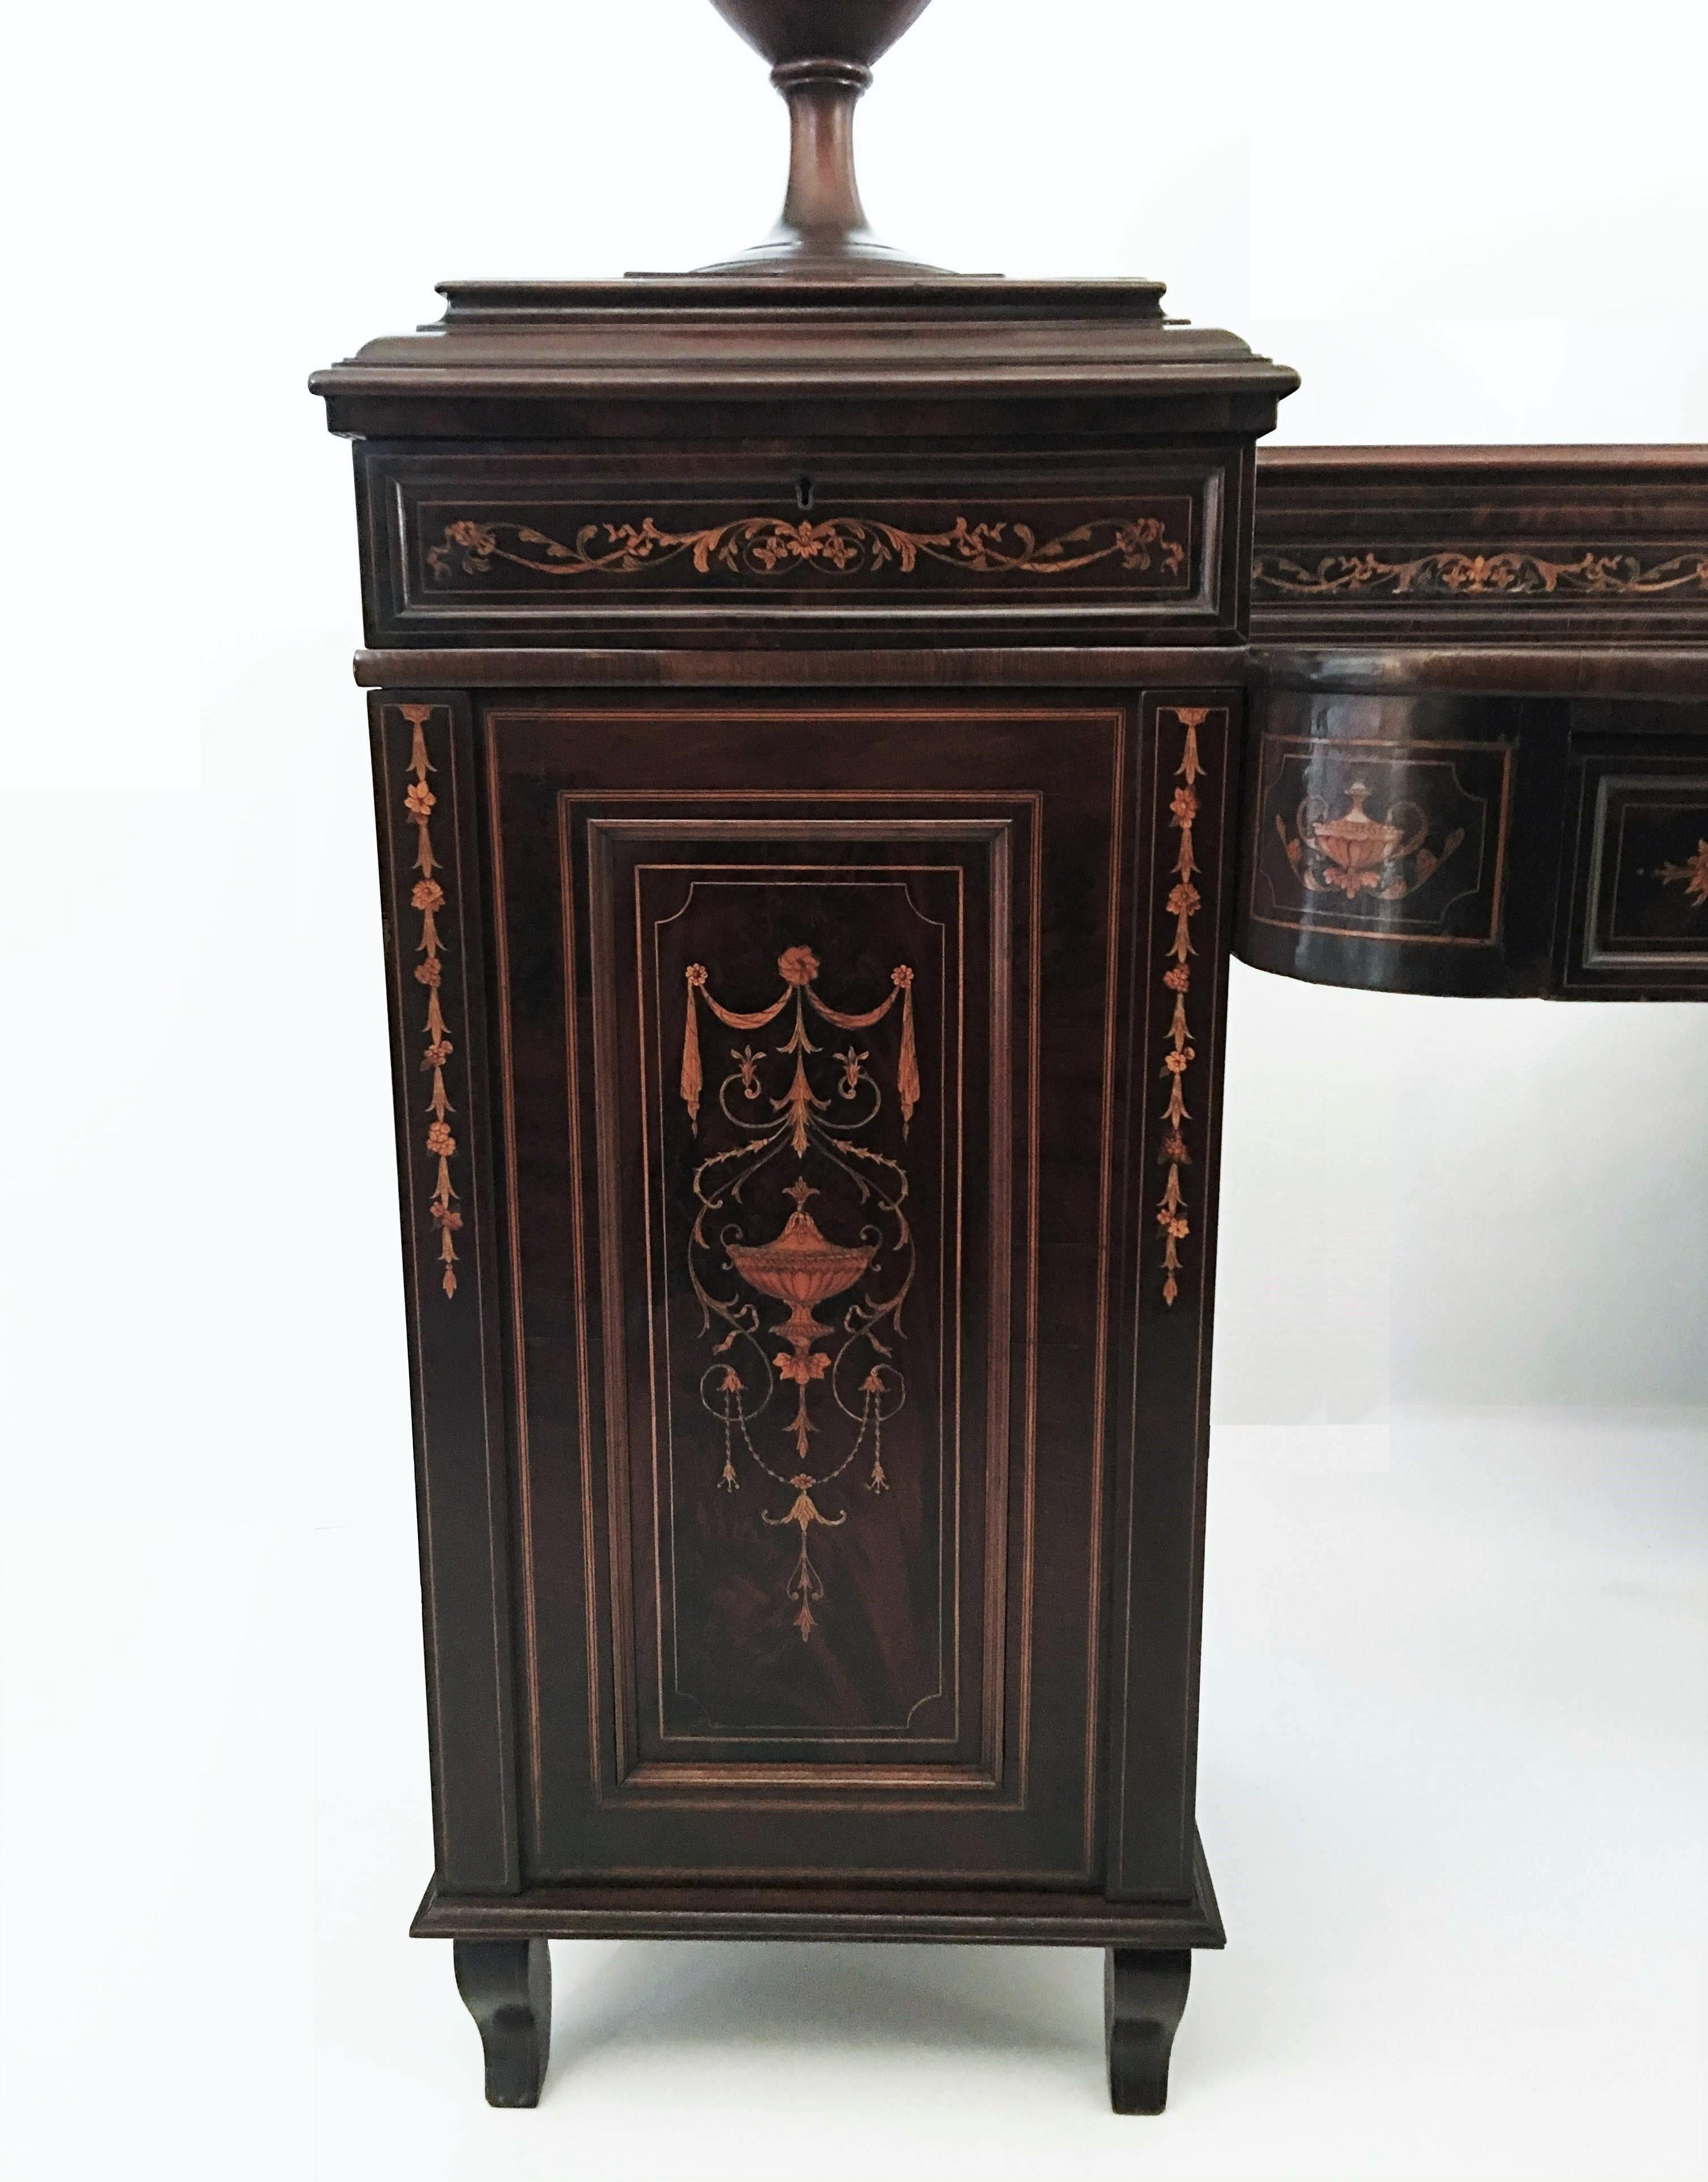 19th Century Regency Marquetry Inlaid Rosewood Sideboard with Cutlery Urns In Good Condition For Sale In Dallas, TX